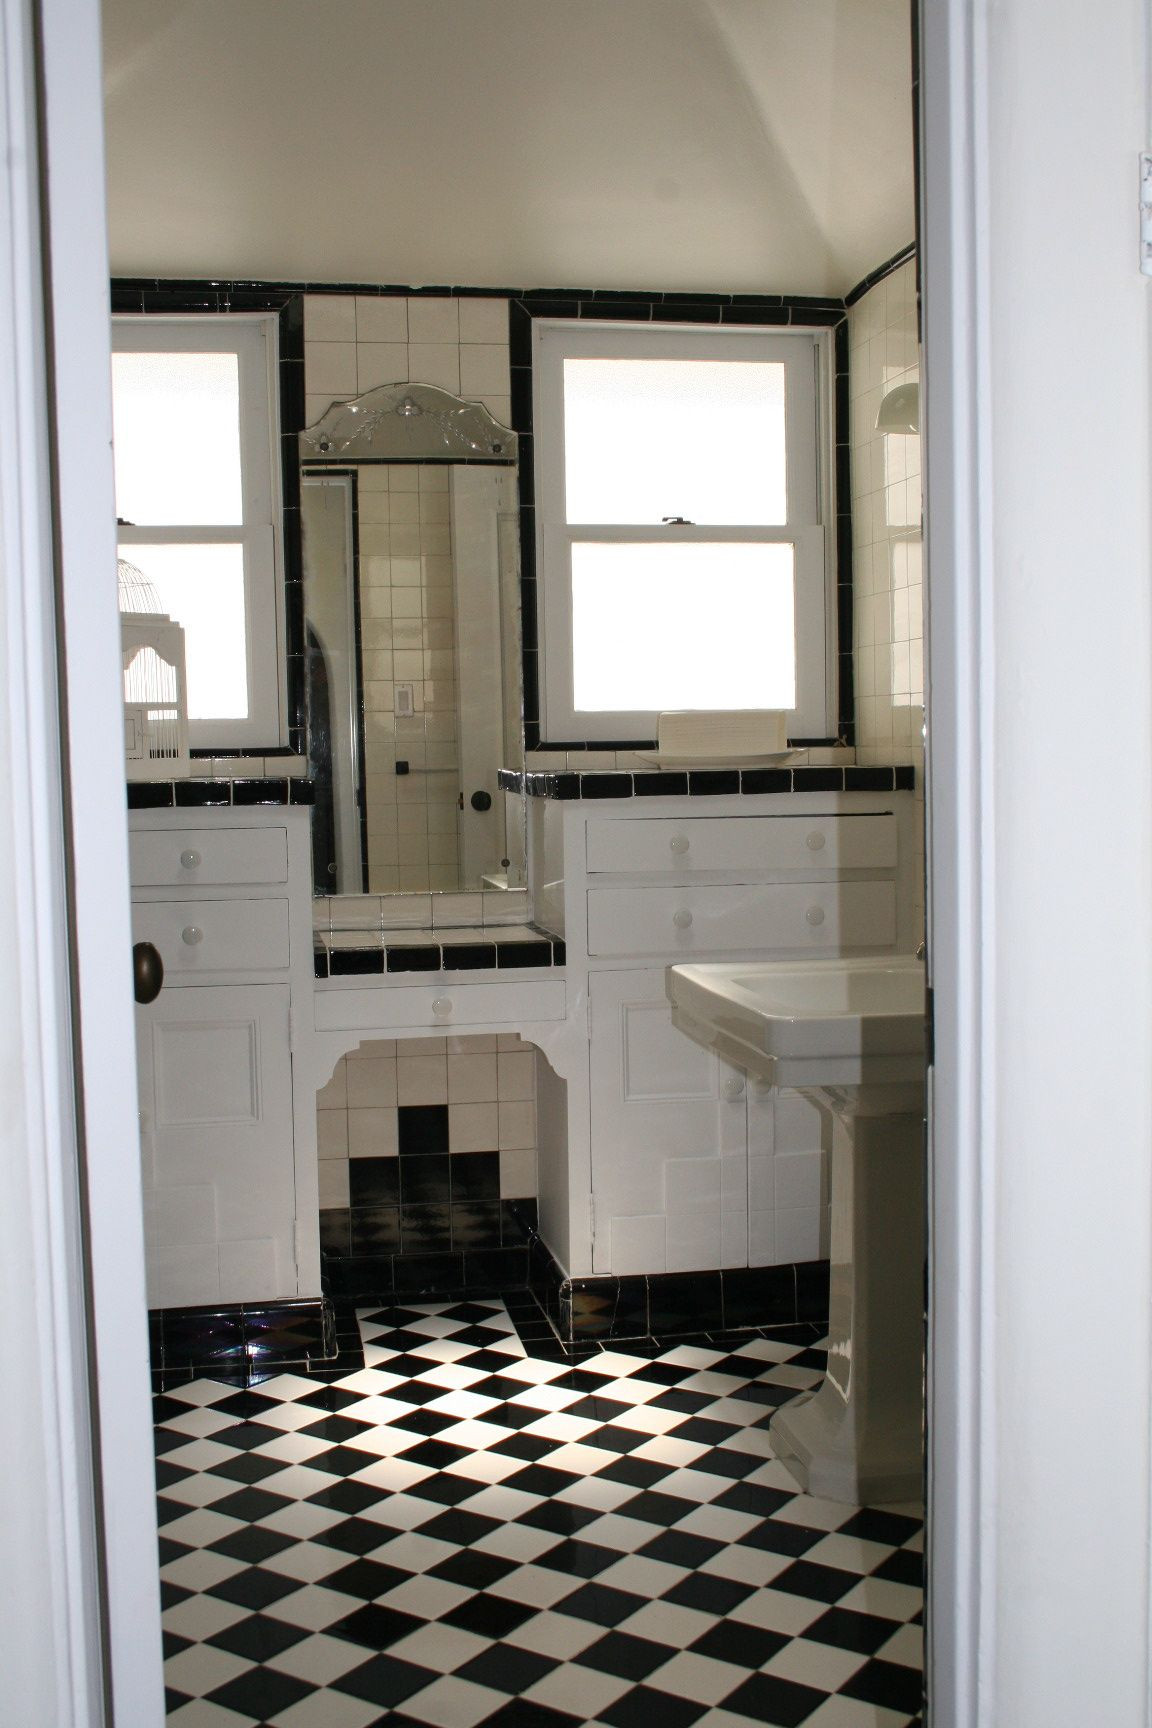 1920S Bathroom Tile
 Restored tile bathroom in a 1920 s Spanish home in the